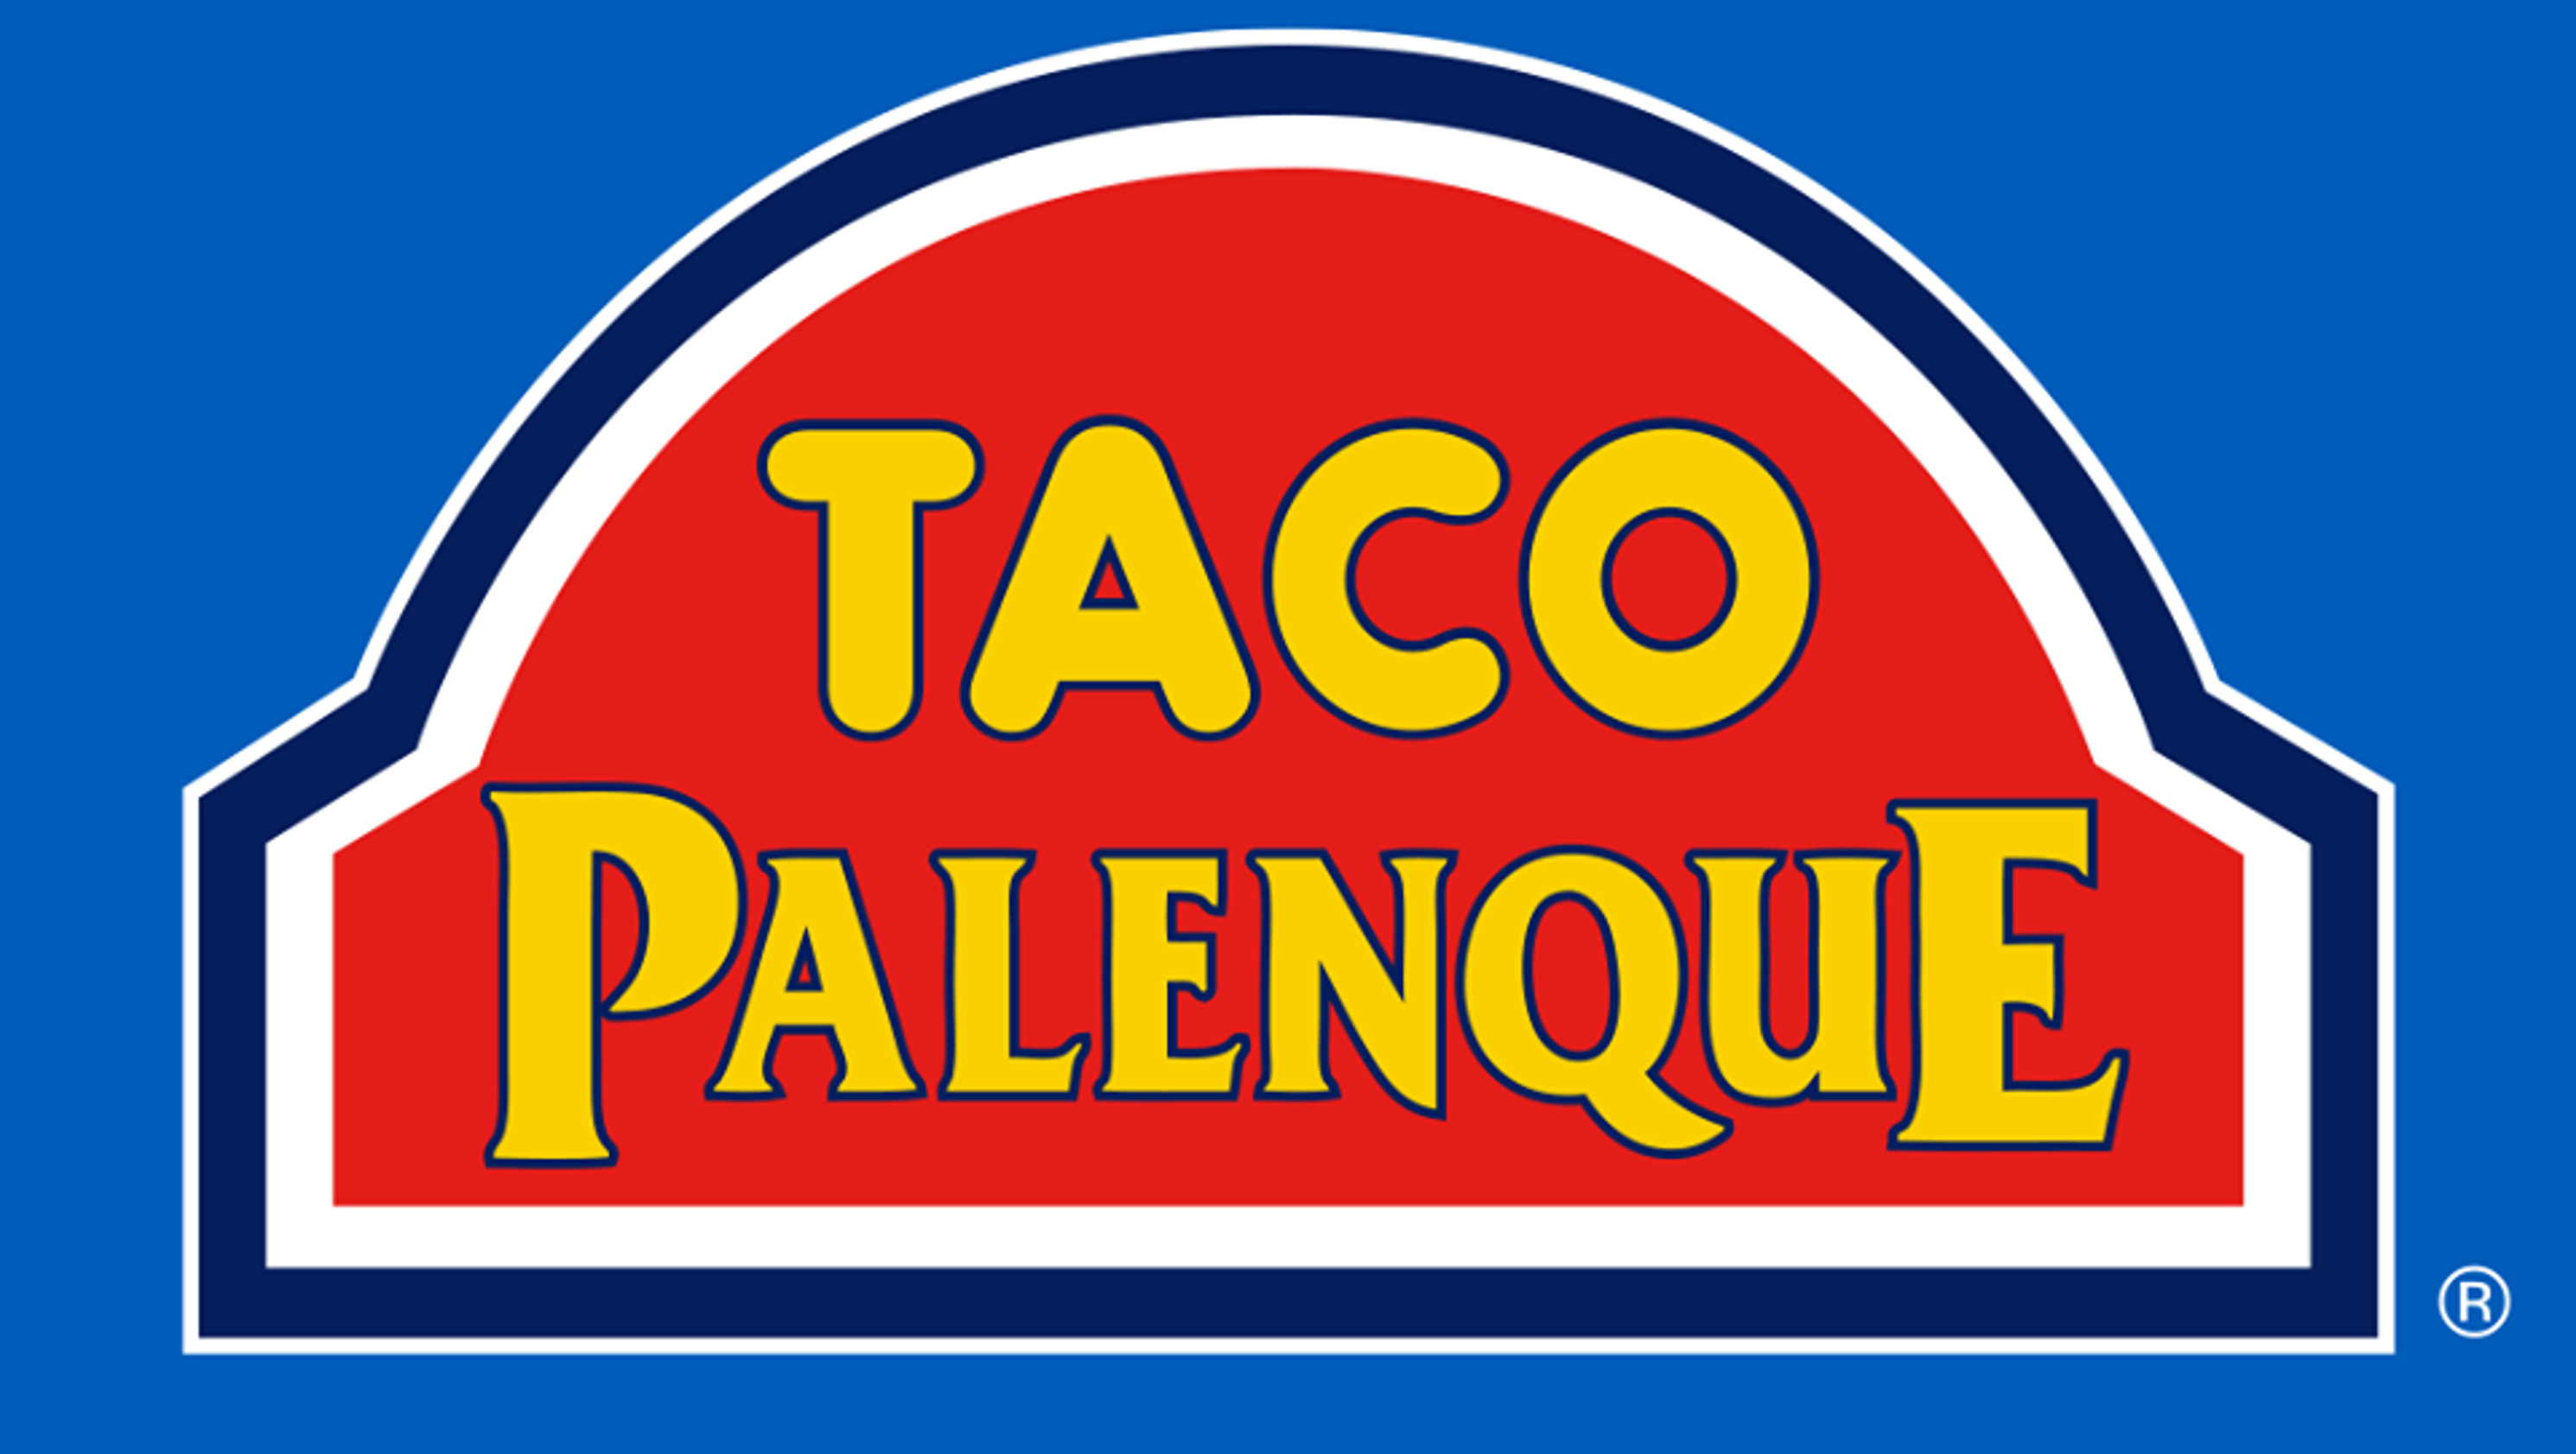 Taco Palenque to open in Kingsville in the fall - Corpus Christi Caller-Times